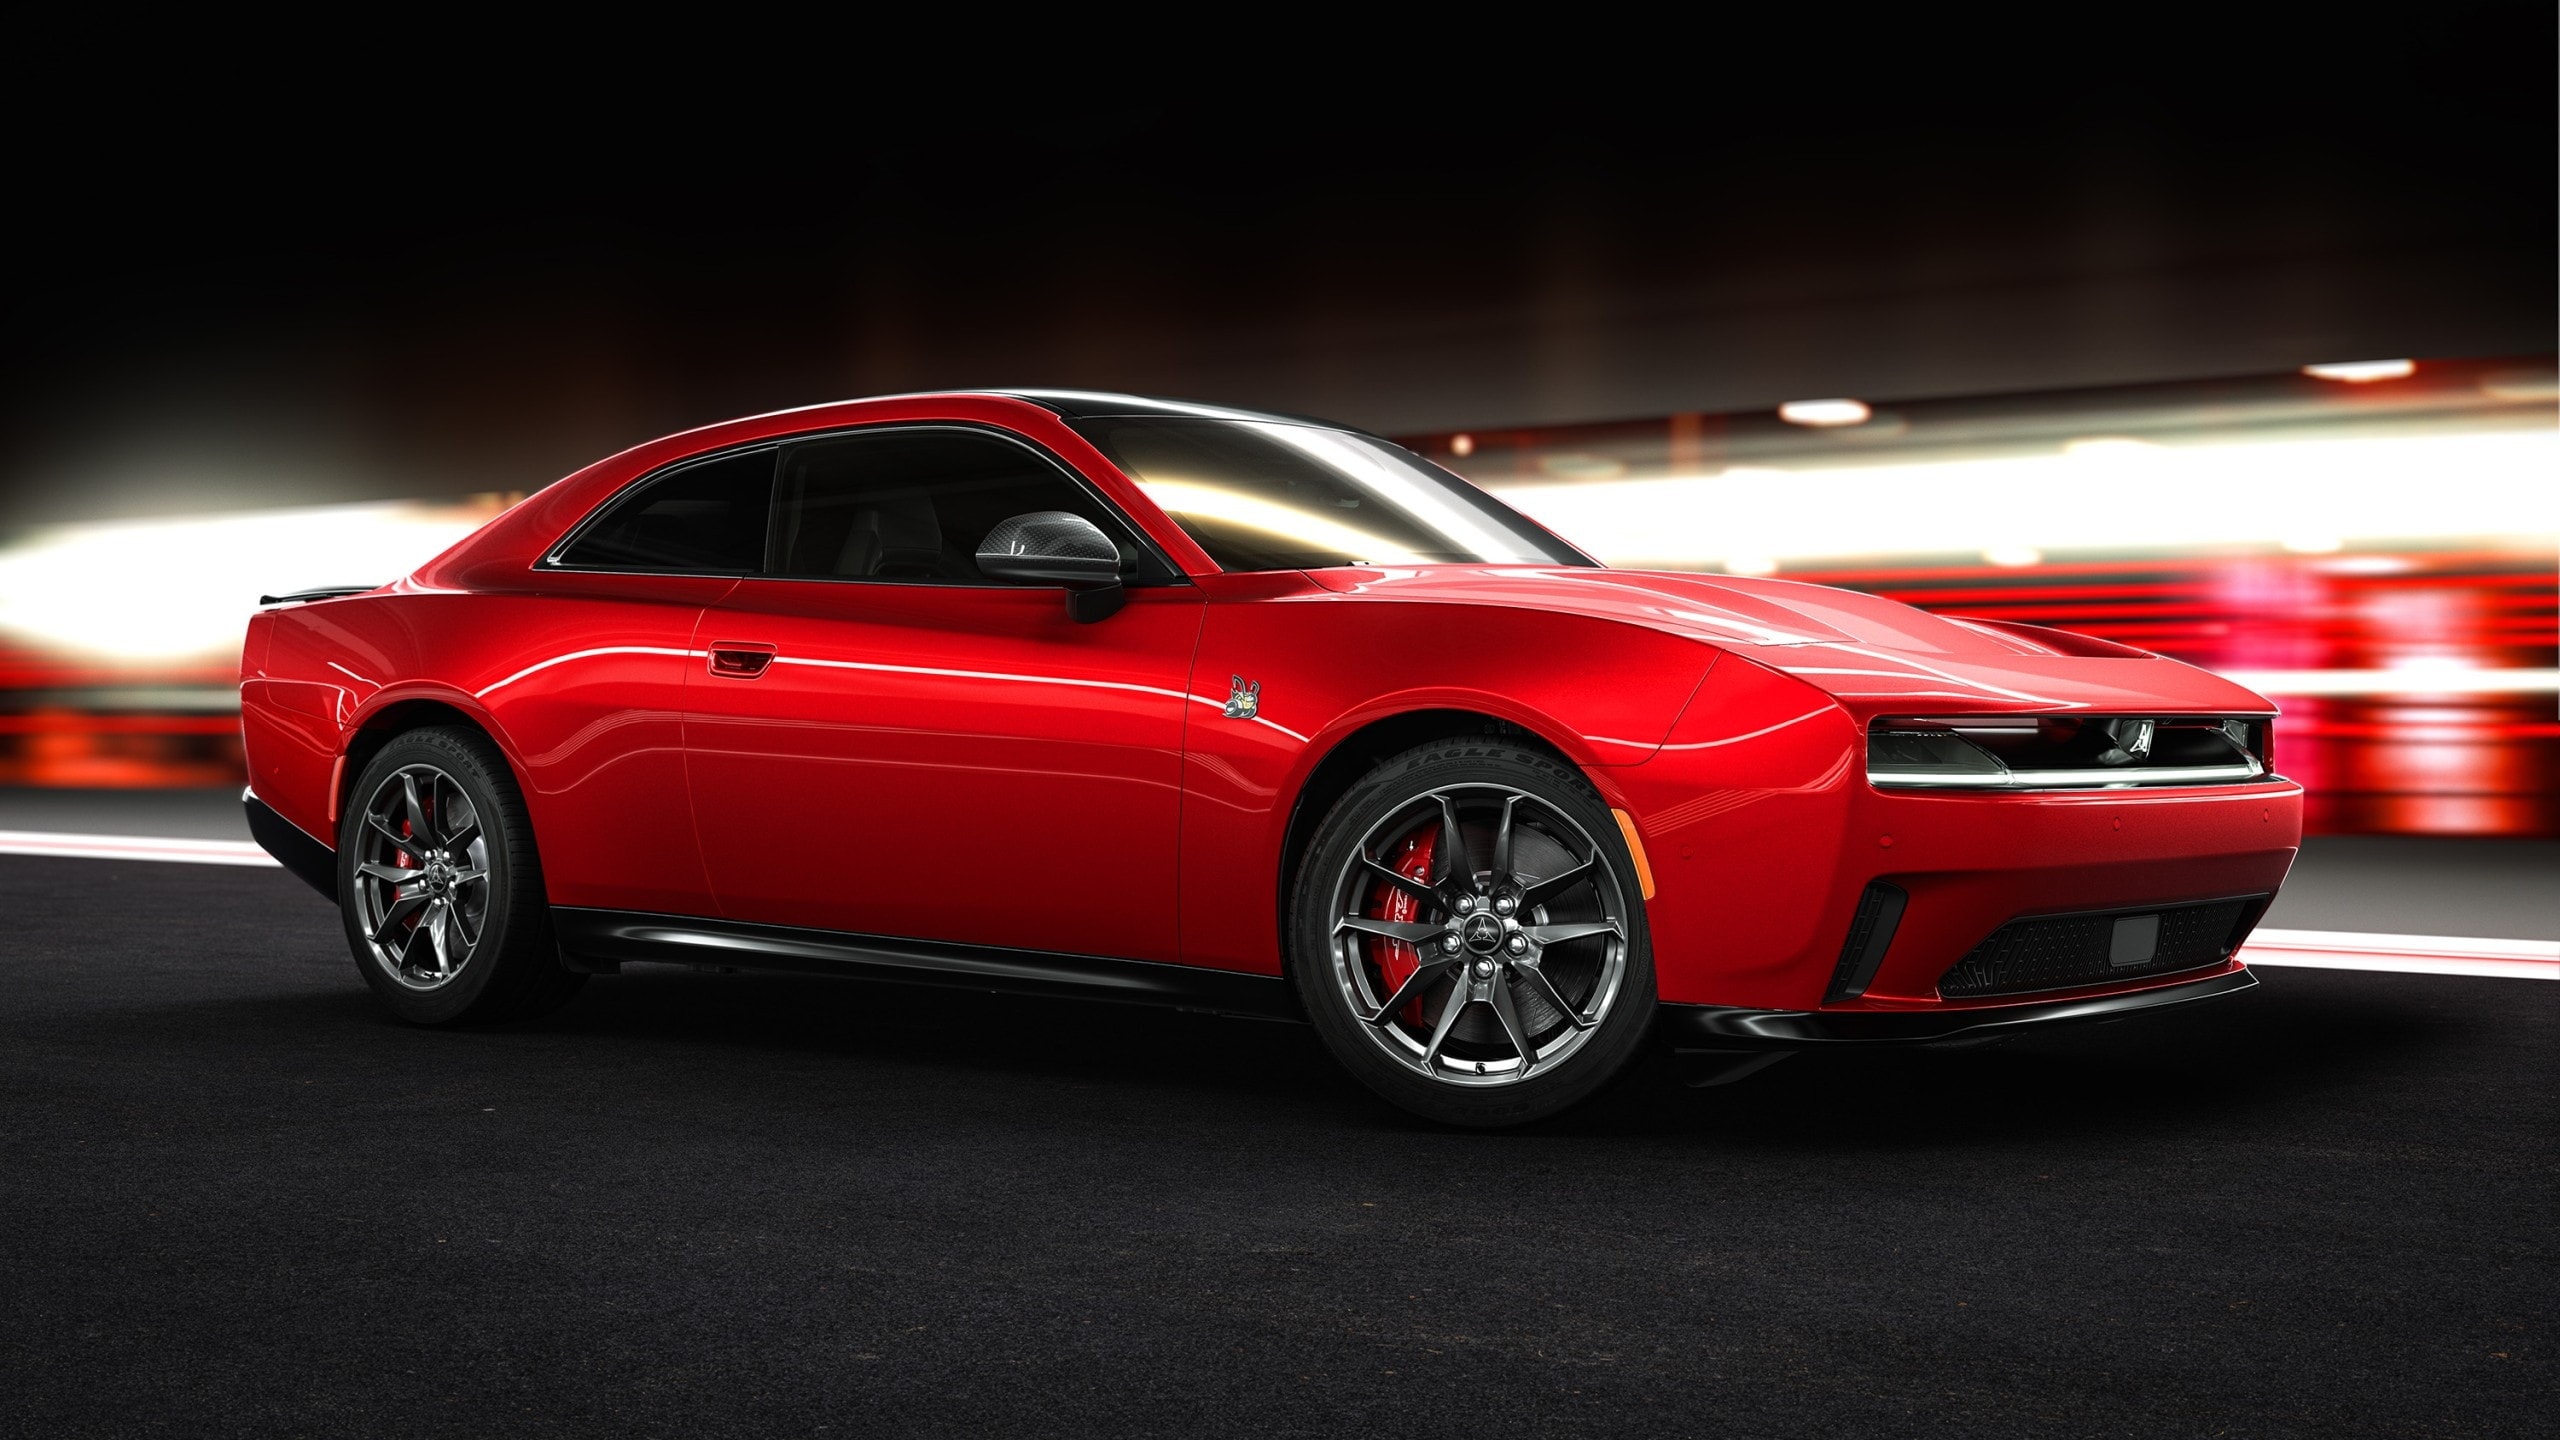 2025 Dodge Charger Redefining Muscle Cars with ICE and EV Power DAX